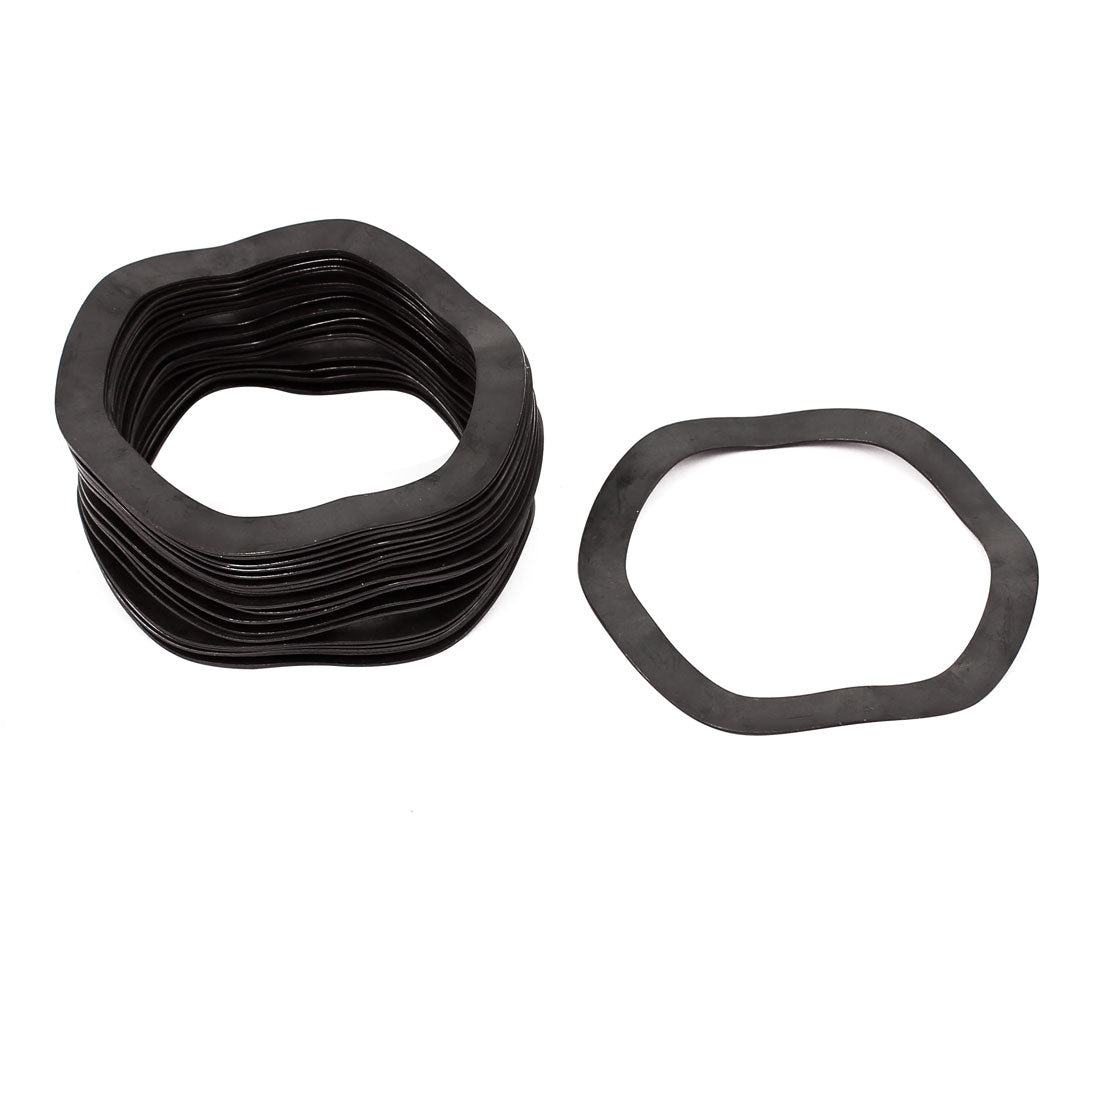 uxcell Uxcell 20 Pcs Black Metal Wavy Wave Crinkle Spring Washers M40 40 x 50 x 0.5mm